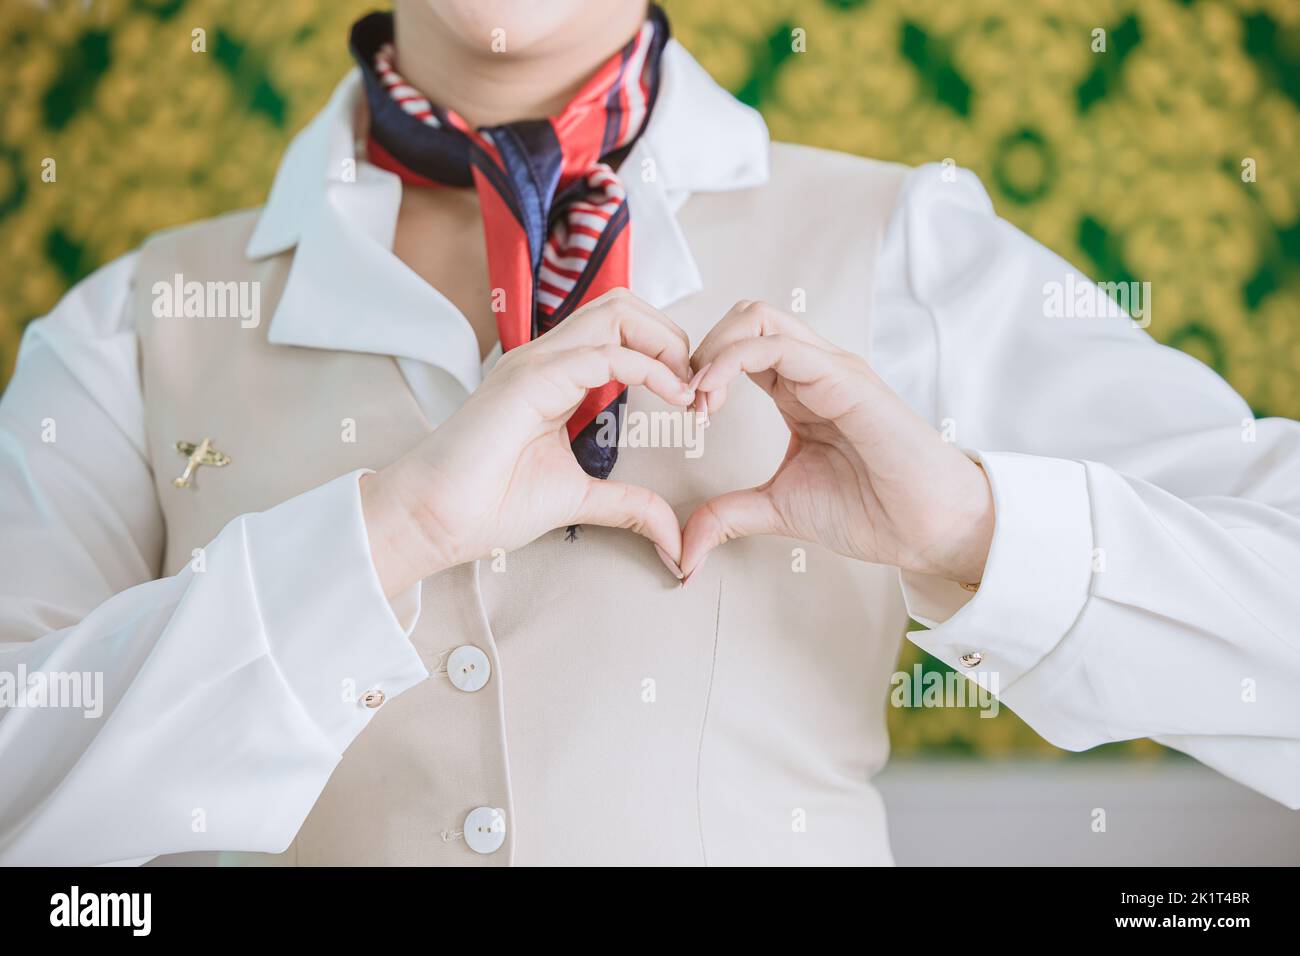 air hostess ground airline staff customer service with care mind heart sign gesture concept Stock Photo